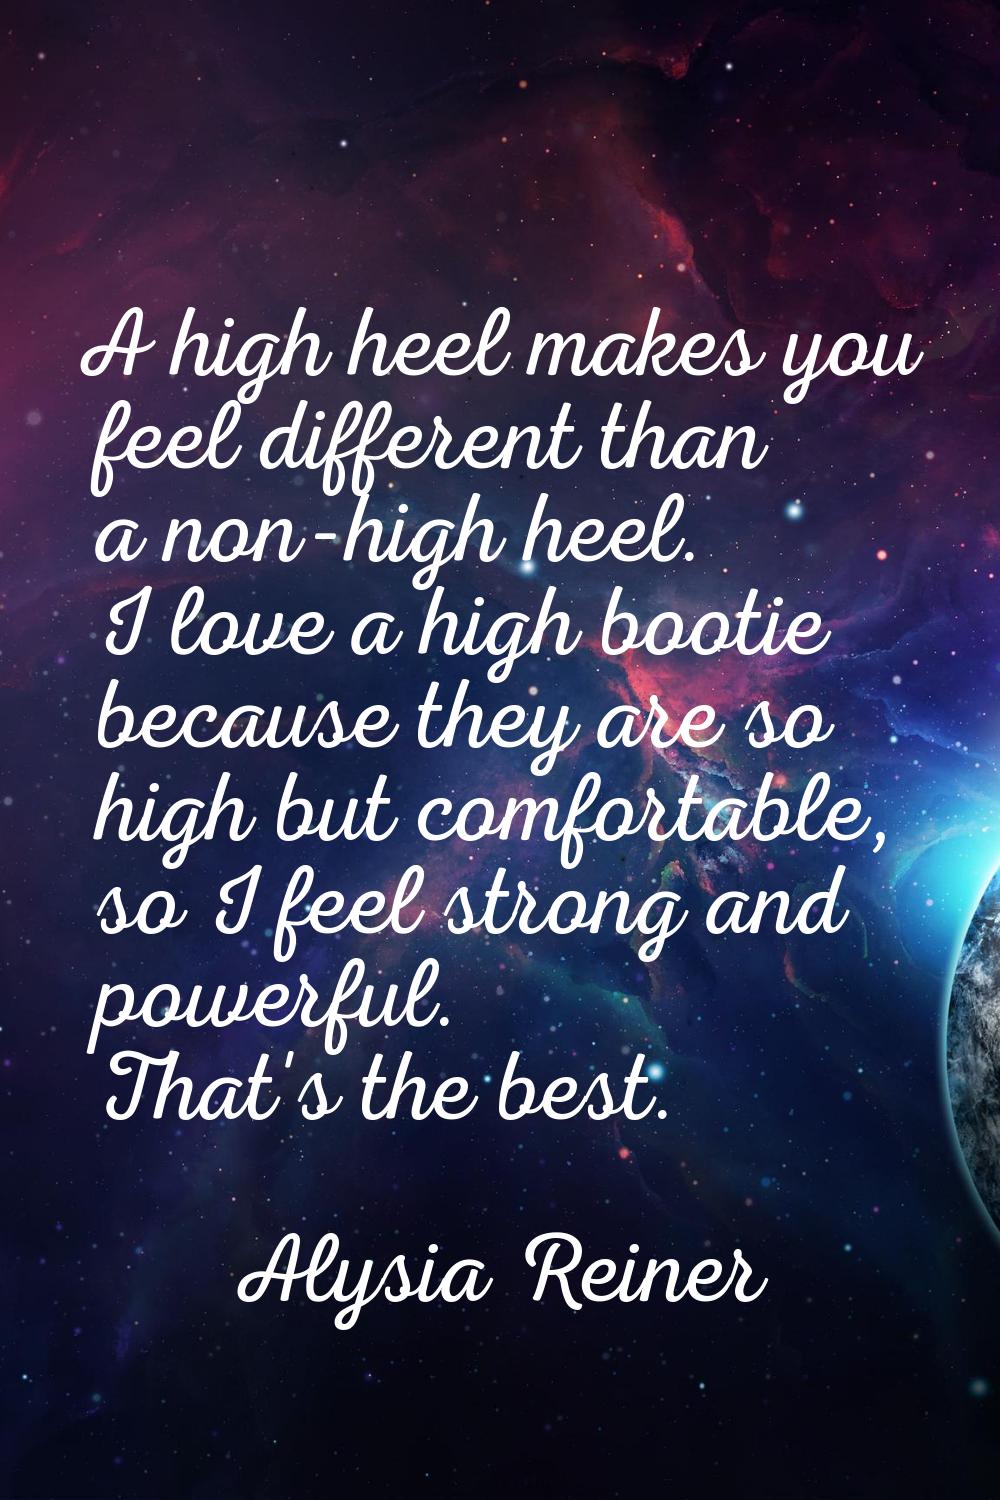 A high heel makes you feel different than a non-high heel. I love a high bootie because they are so